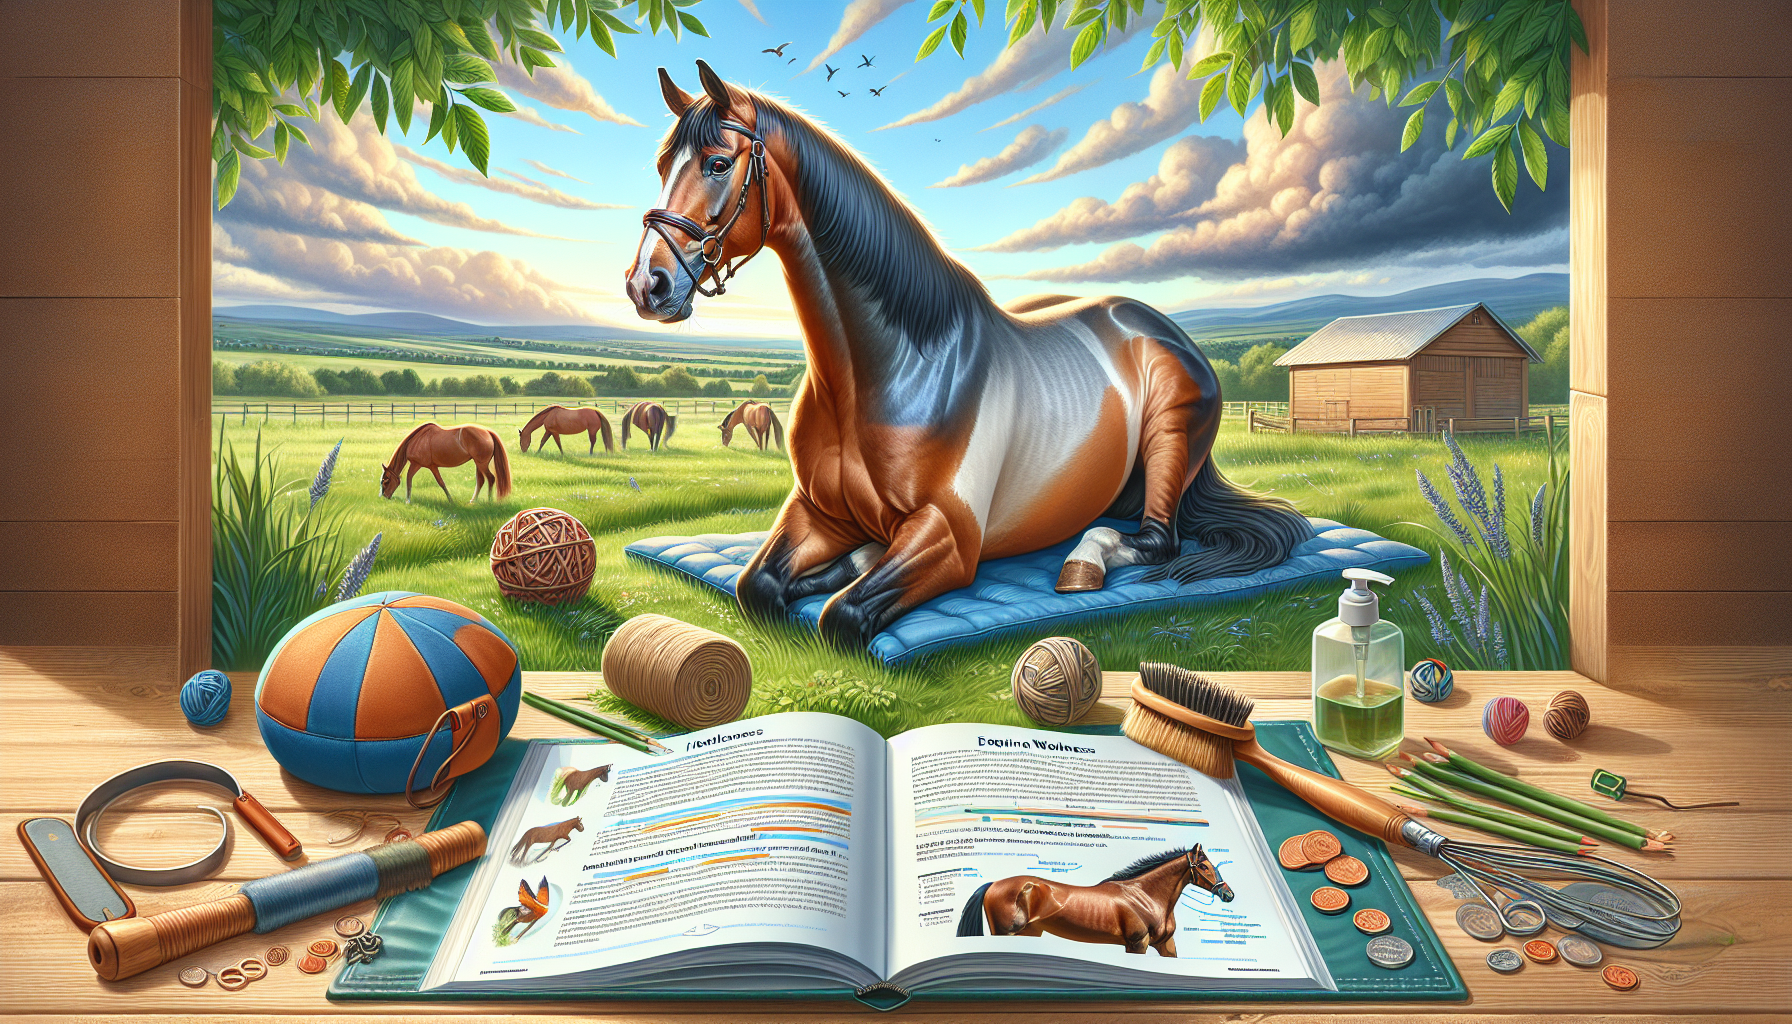 Equine wellness: understanding and alleviating stress in horses